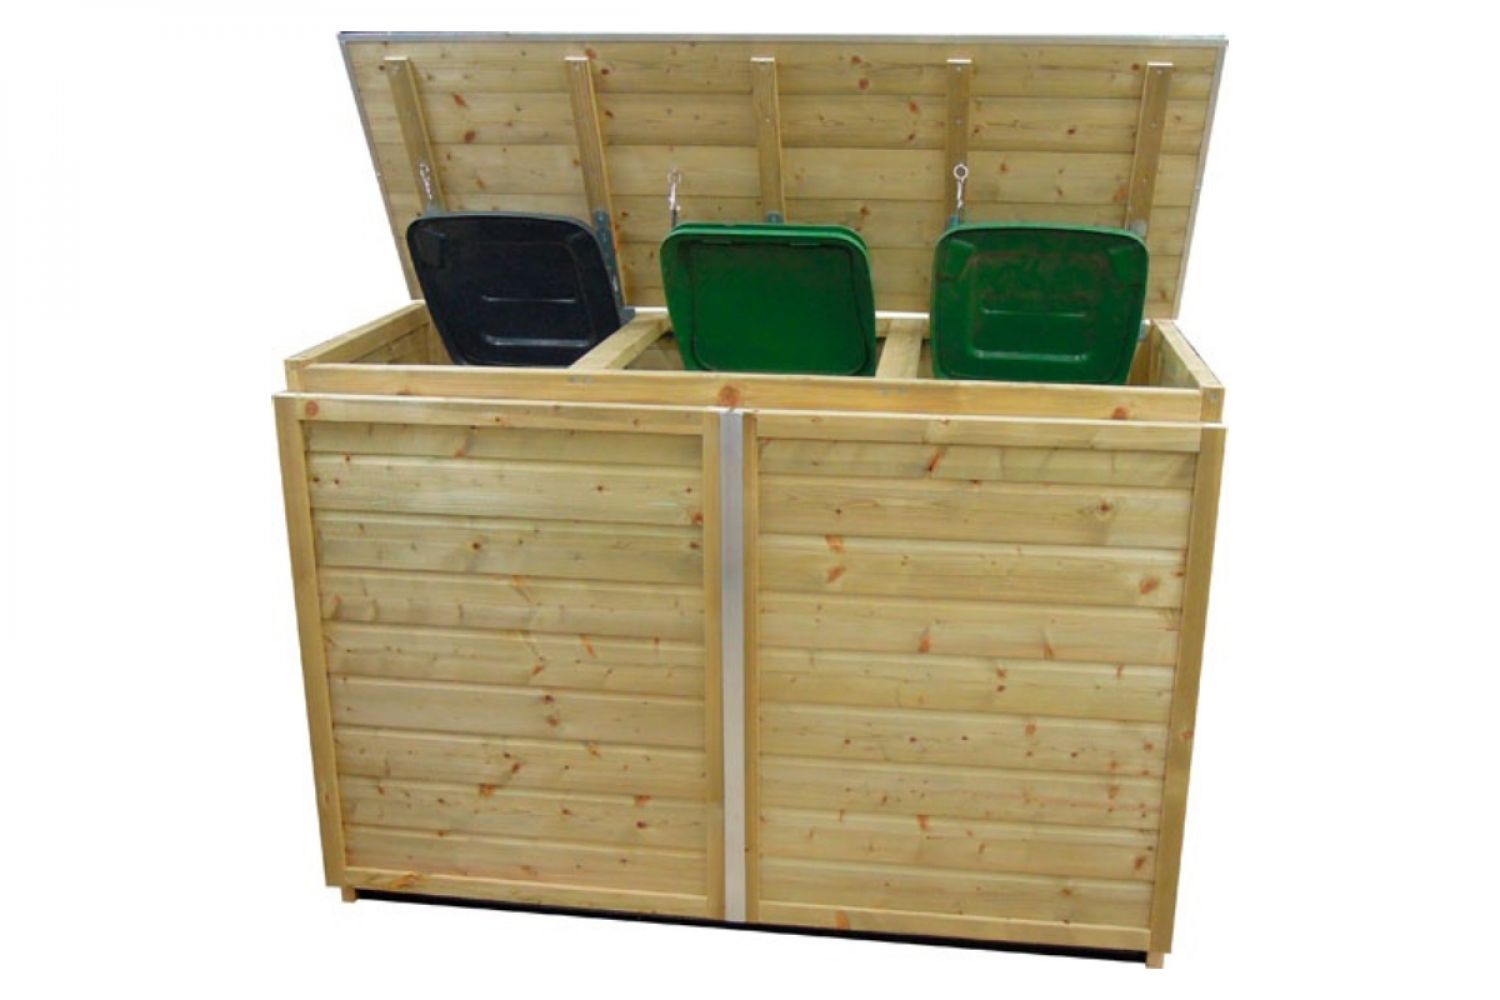 LK260TRIO-R Containerberging | 223x90x125 cm - voor 3 containers!